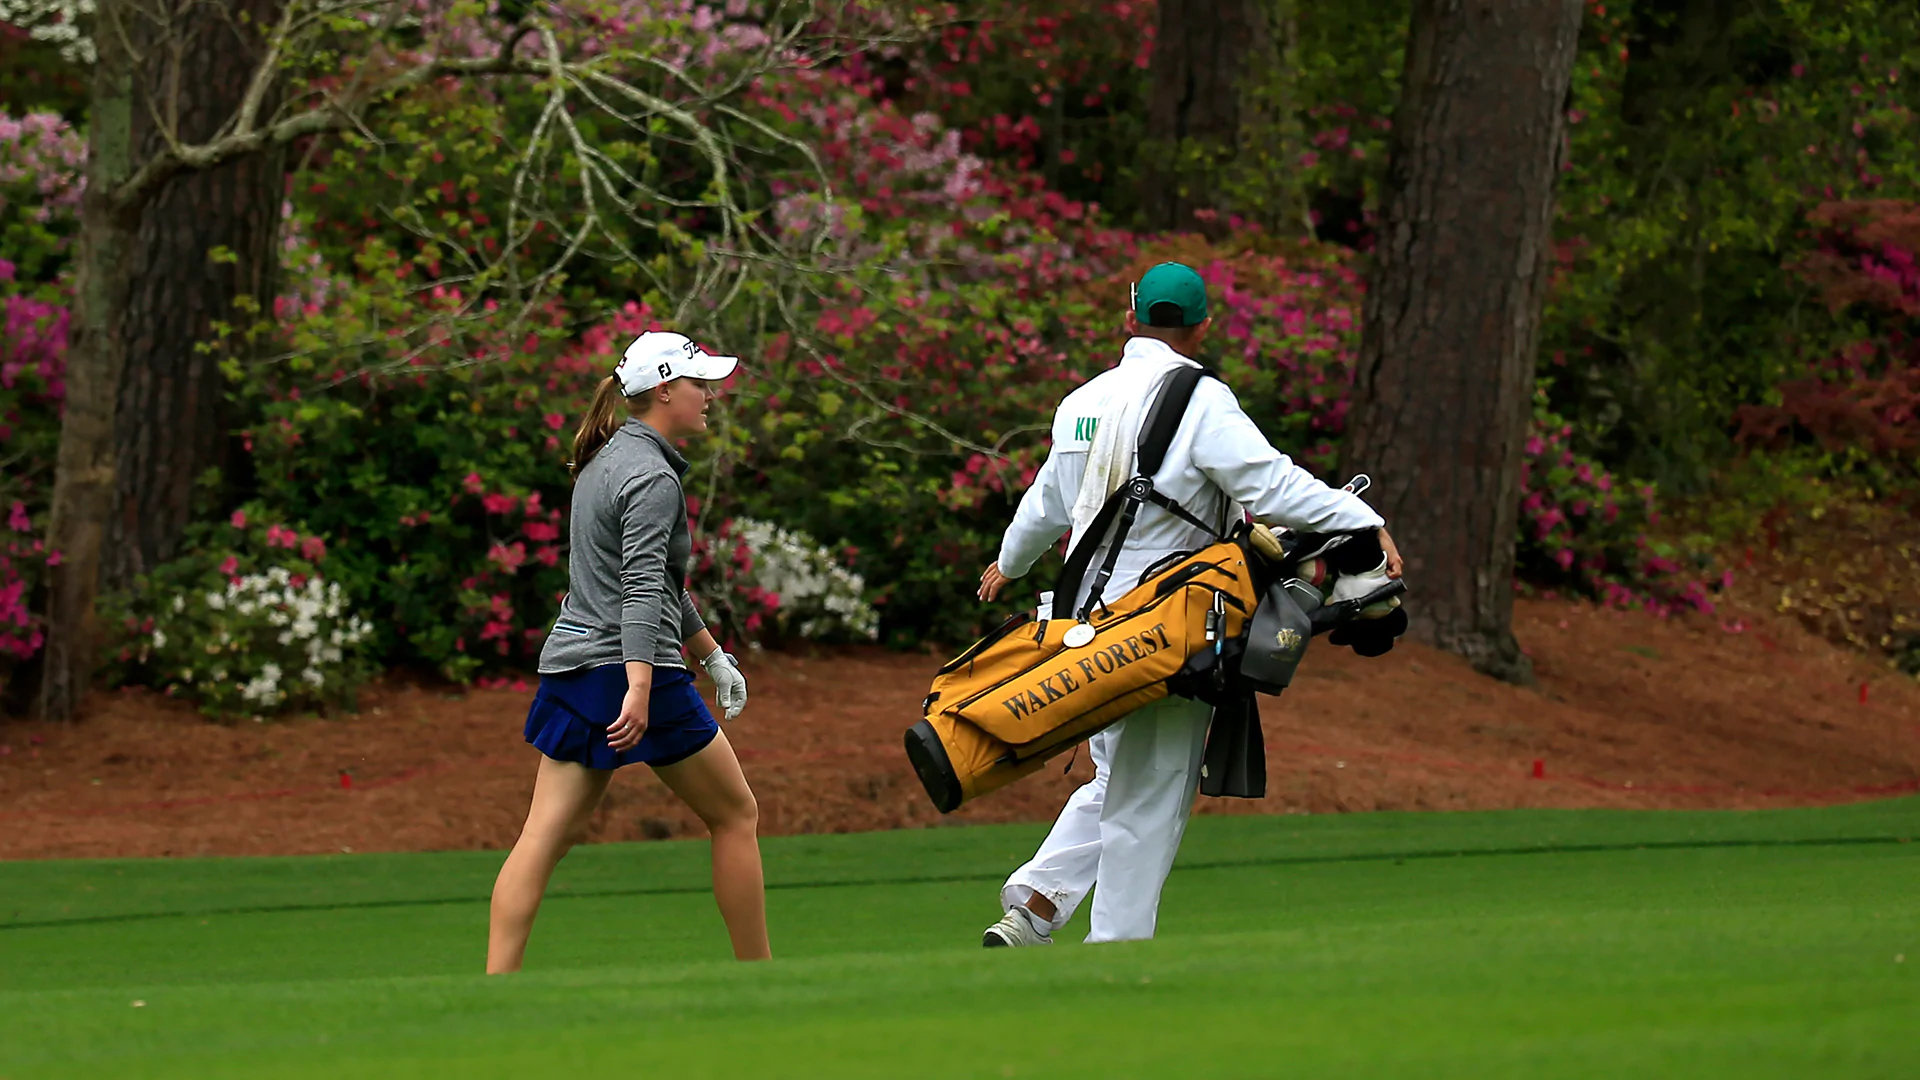 Local or loyal? Competitors make tough caddie decisions at Augusta National Women’s Amateur